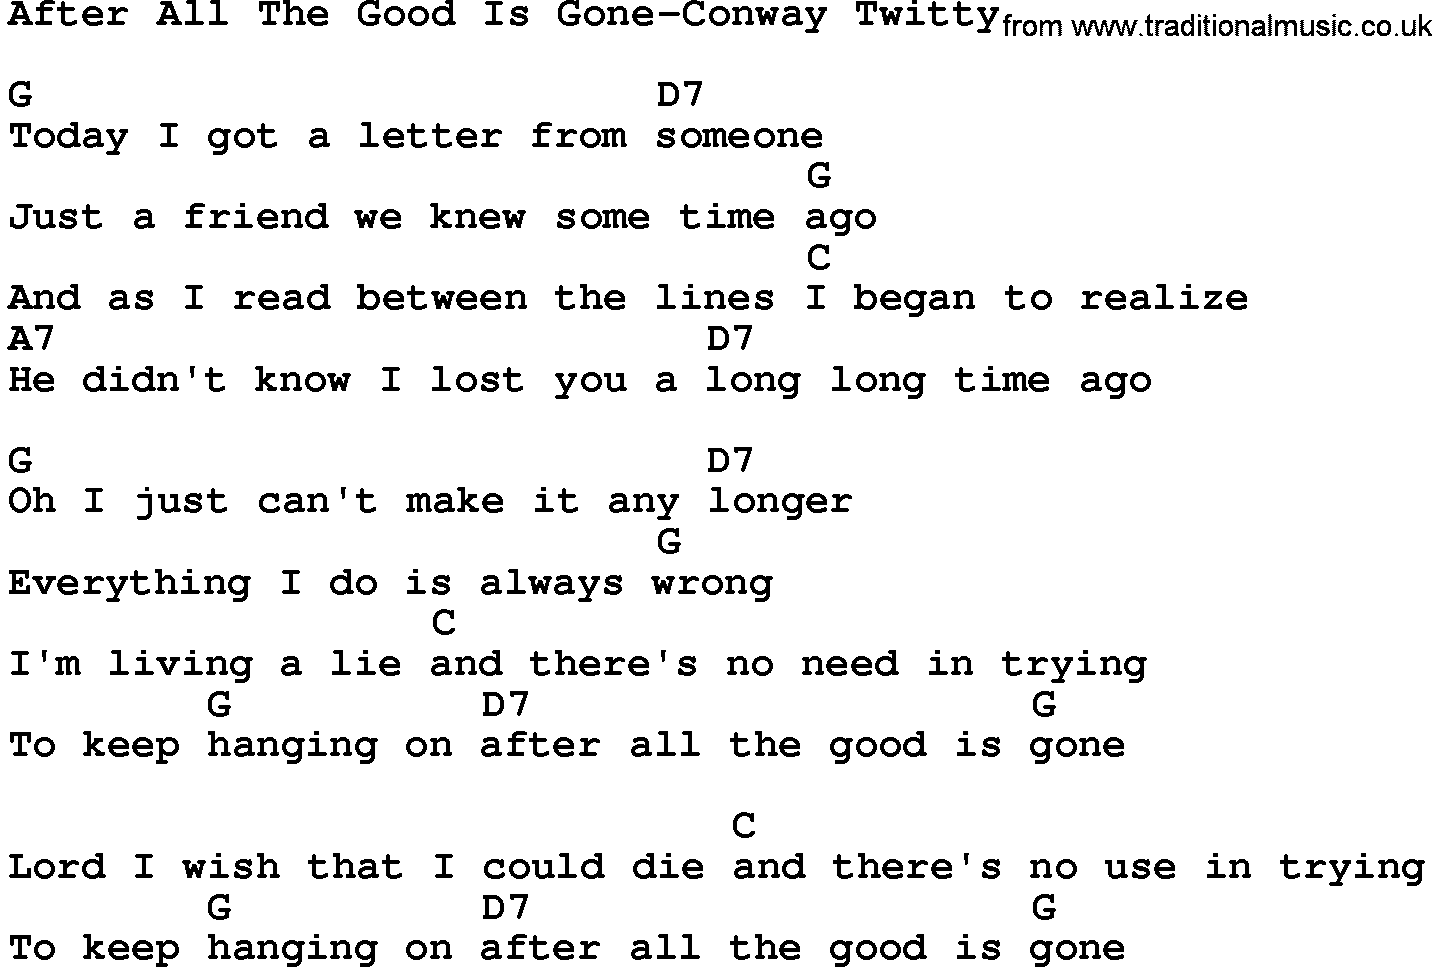 Country music song: After All The Good Is Gone-Conway Twitty lyrics and chords